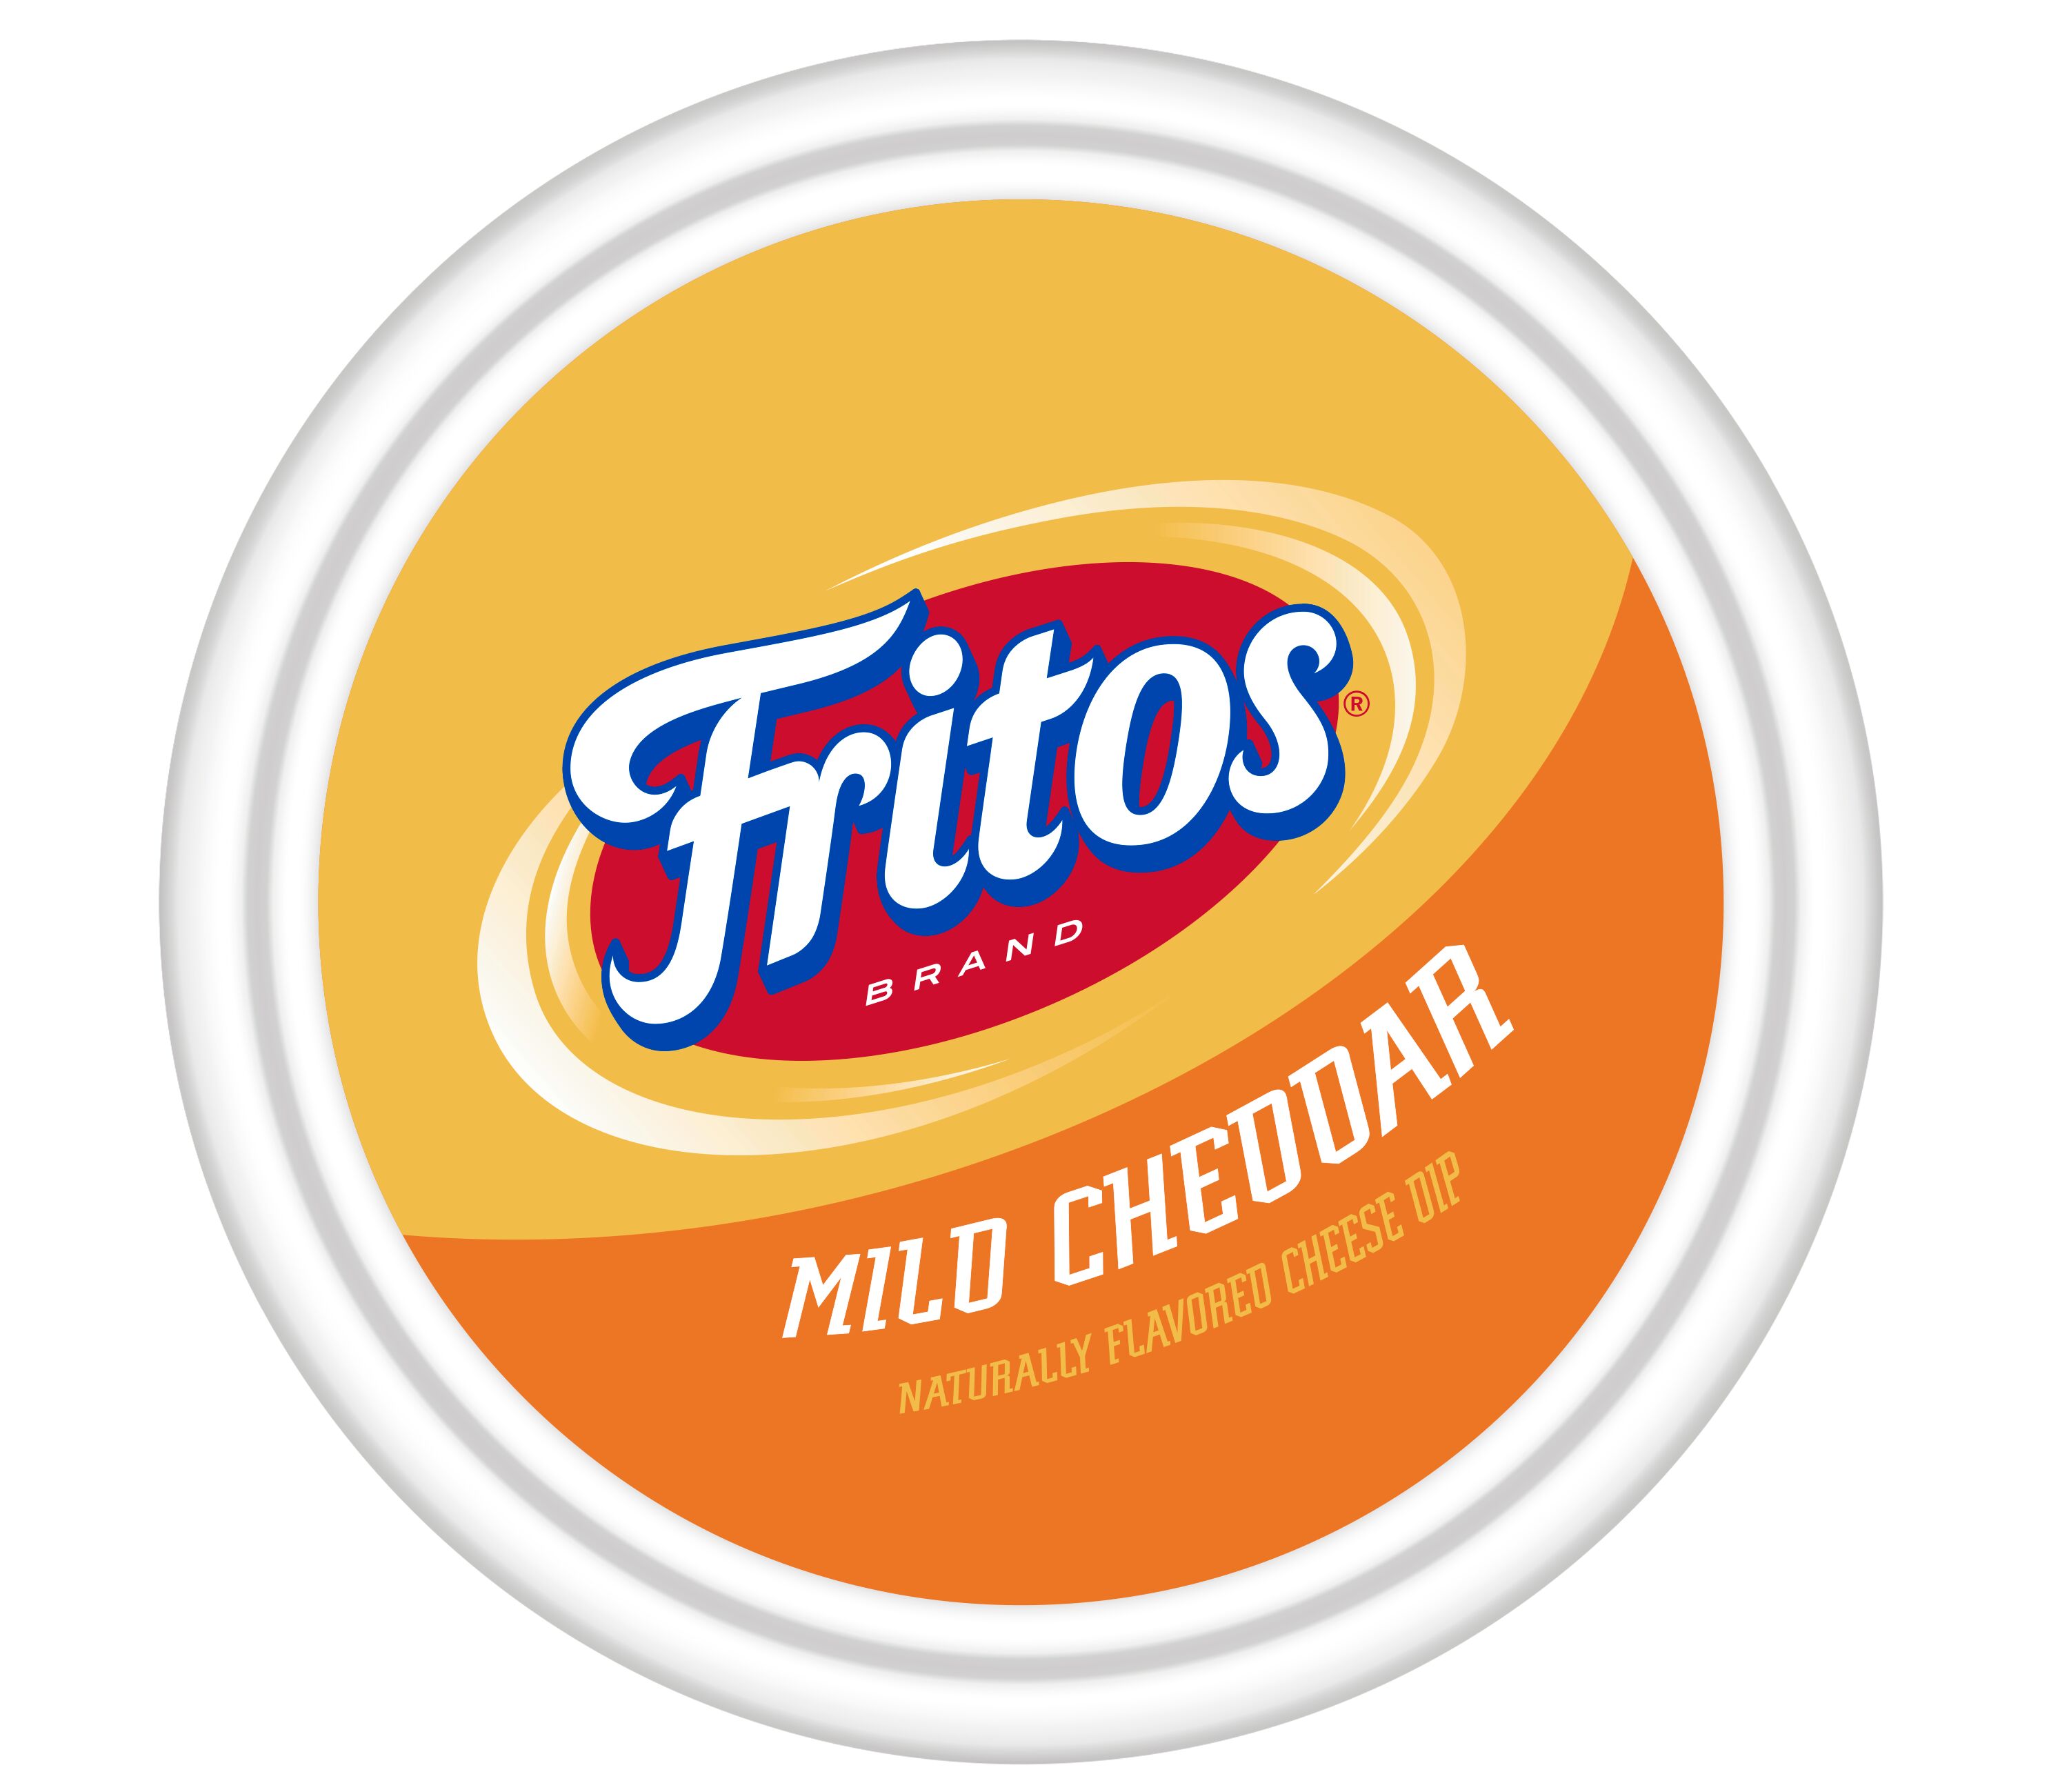 Fritos Mild Cheddar Flavored Cheese Dip, 9 oz Shelf-stable Can - image 4 of 9